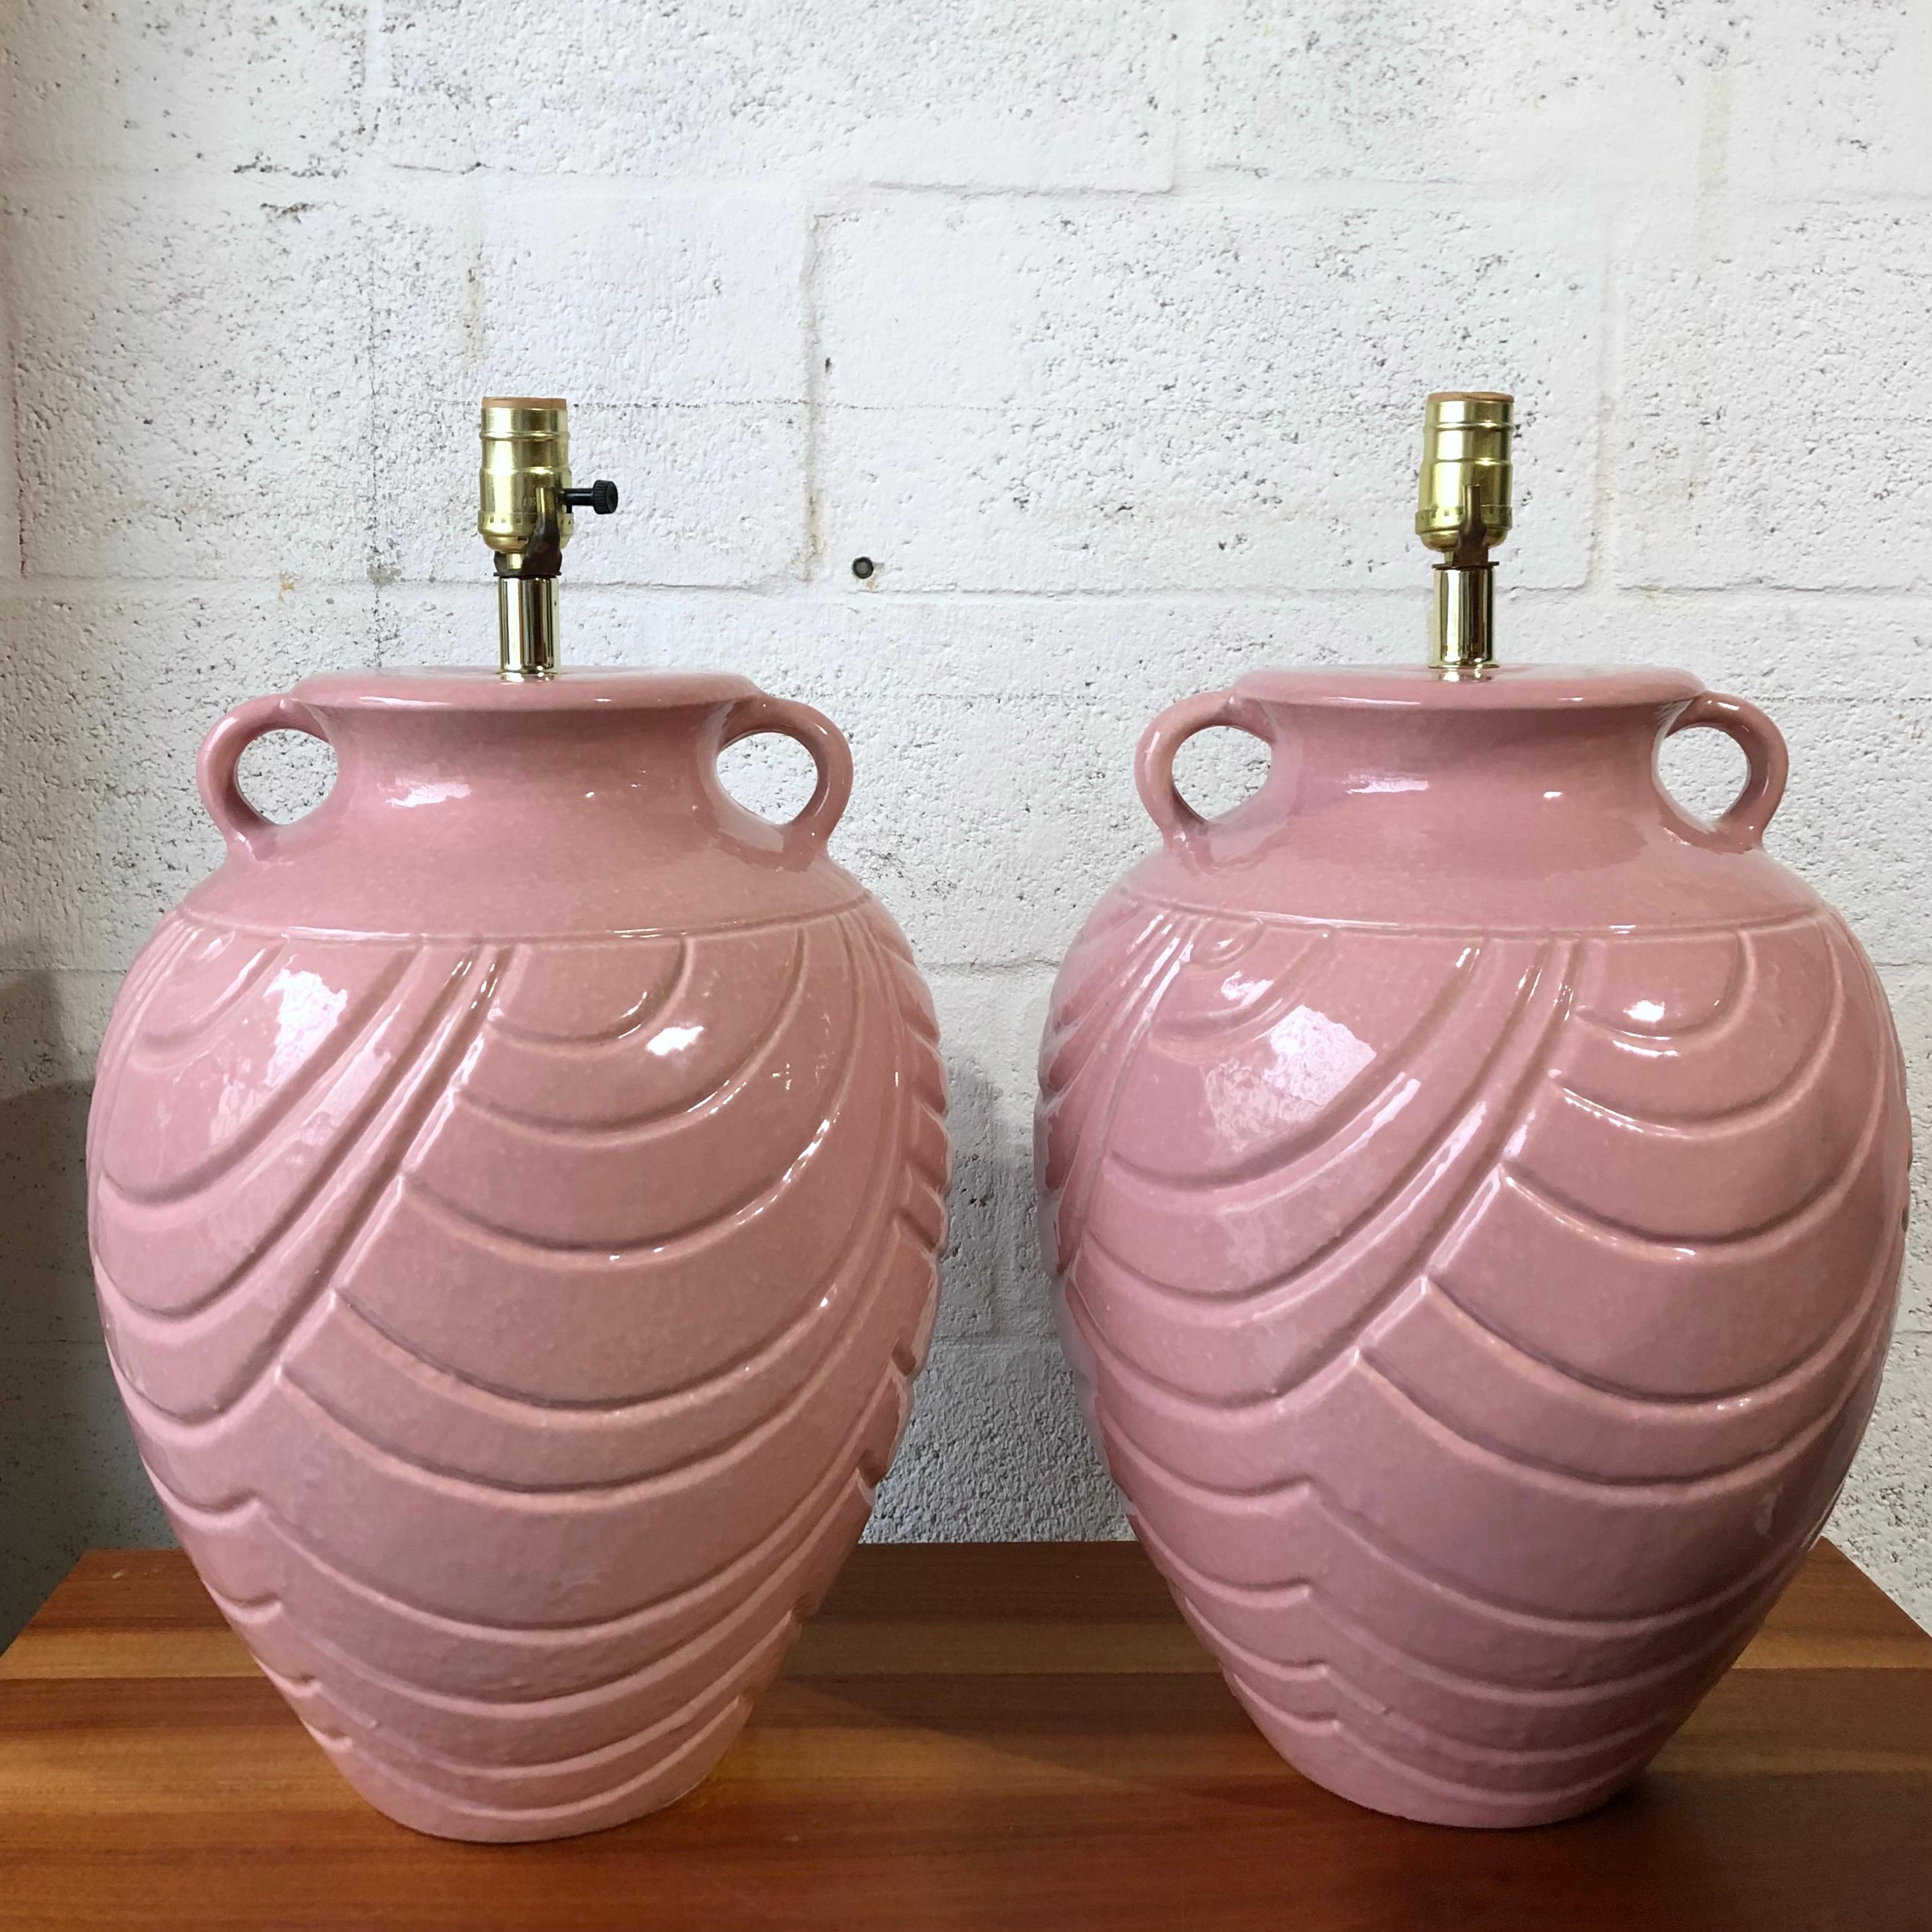 A pair of large late 20th century two handles jar ceramic table lamps. C 1980s
Feature a modernist interpretation of a traditional two handles water jar. With carved arches and a glossy soft pink ceramic glaze. 
The Lamps are in a very good